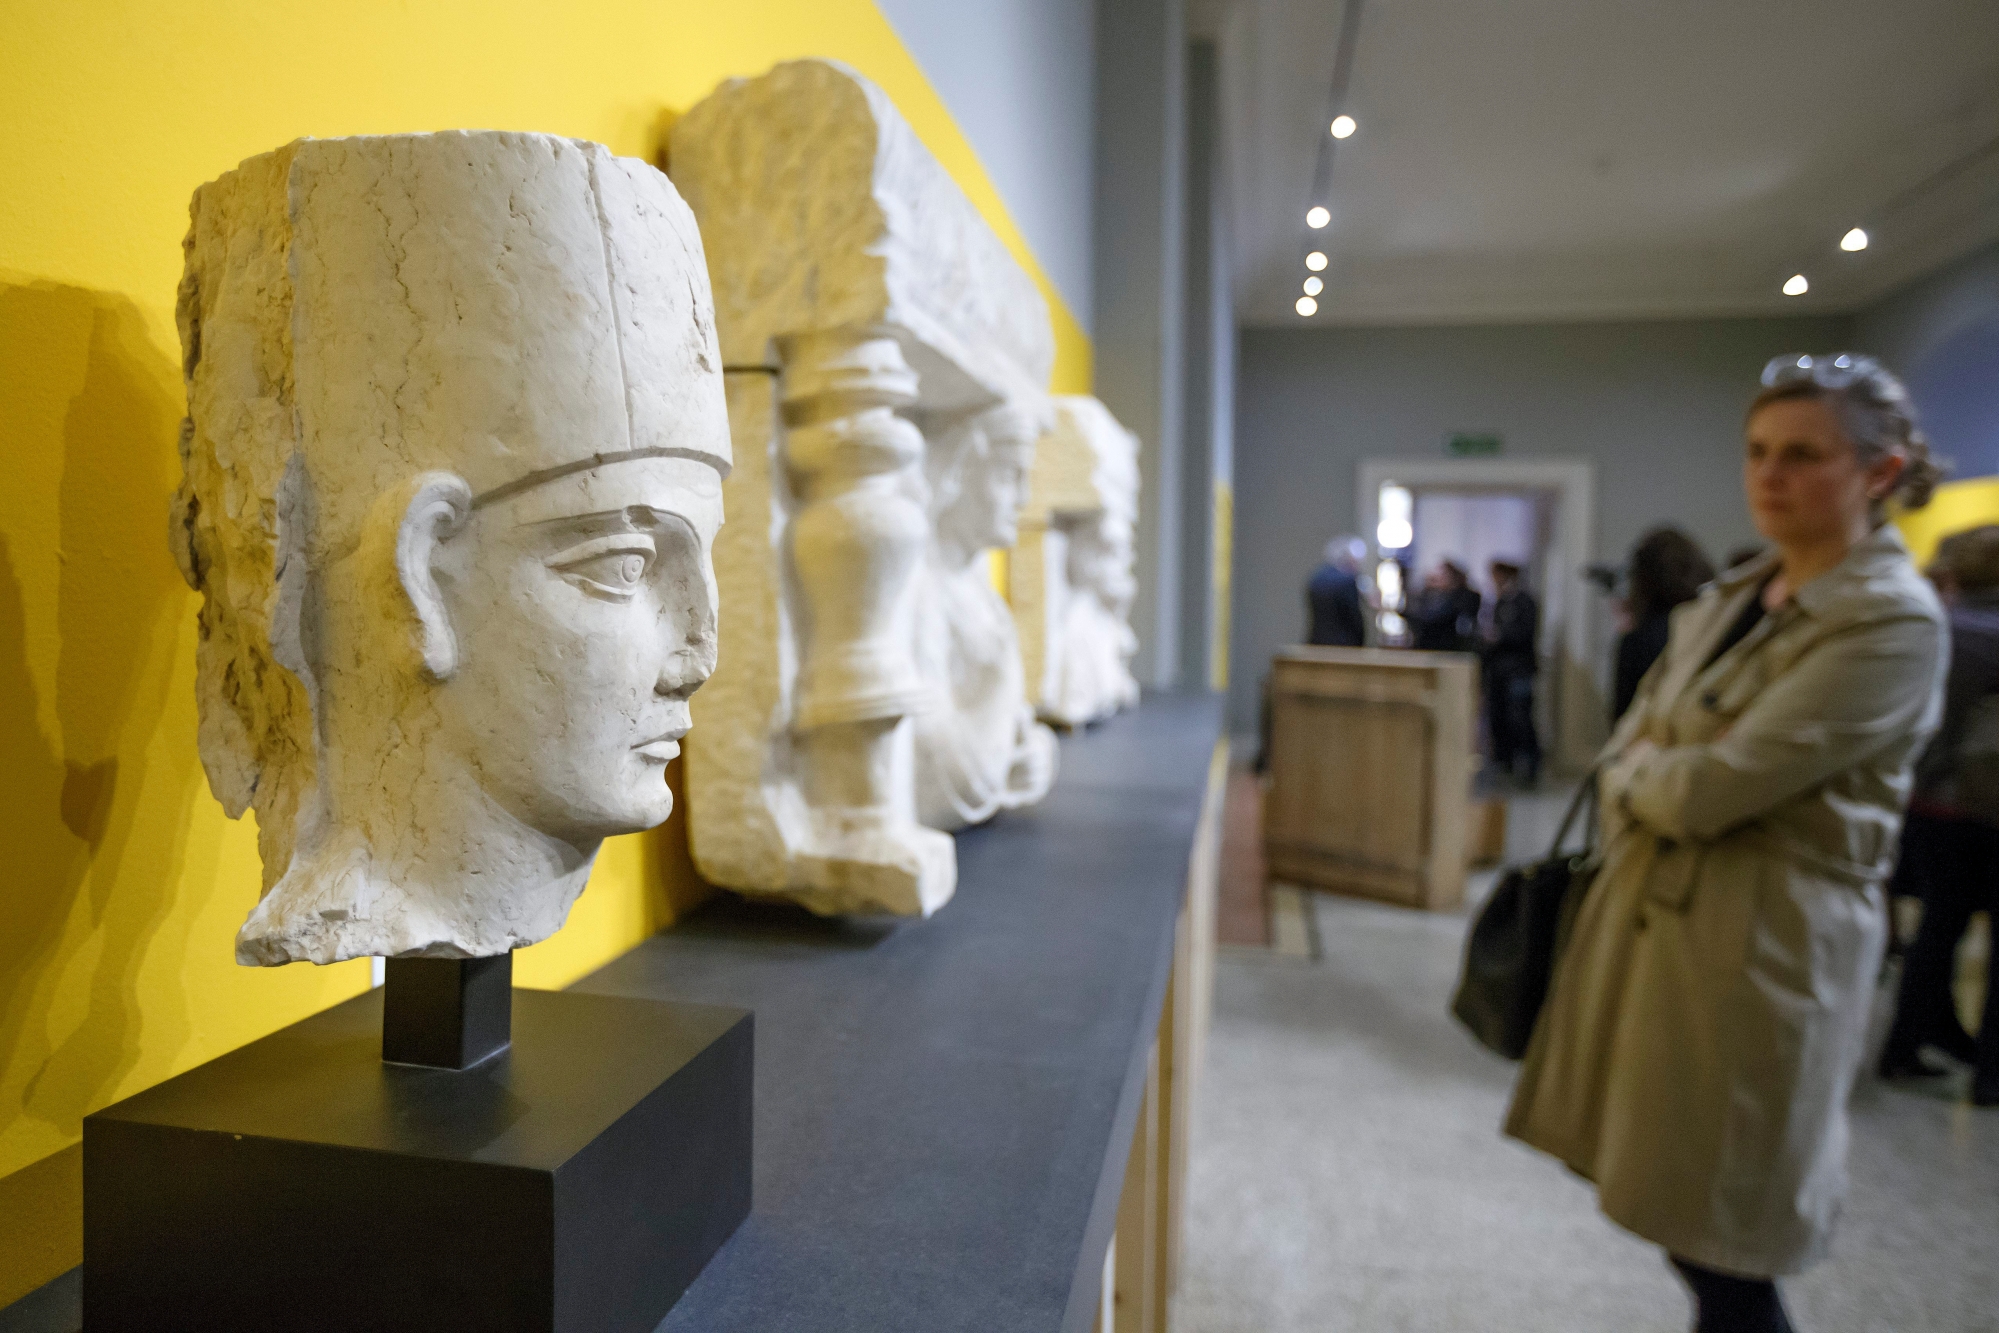 A person looks on a head of priest wearing cylindrical modius (of Palmyra) and two funerary artifacts of Palmyra, during a presentation of archaeological objects resulting from illicit trafficking, at the Musee d'Art et d'Histoire, in Geneva, Switzerland, on Tuesday, March 14, 2017. For a few months, the Musee d'Art et d'Histoire presents nine archaeological objects from Yemen, Syria and Libya, discovered by the Swiss Customs in 2013 at Geneva's Port Francs, resulting from the illicit traffic of cultural property and confiscated by the public prosecutor of Geneva. (KEYSTONE/Salvatore Di Nolfi) SWITZERLAND ARCHAEOLOGICAL ILLICIT TRAFFICKING